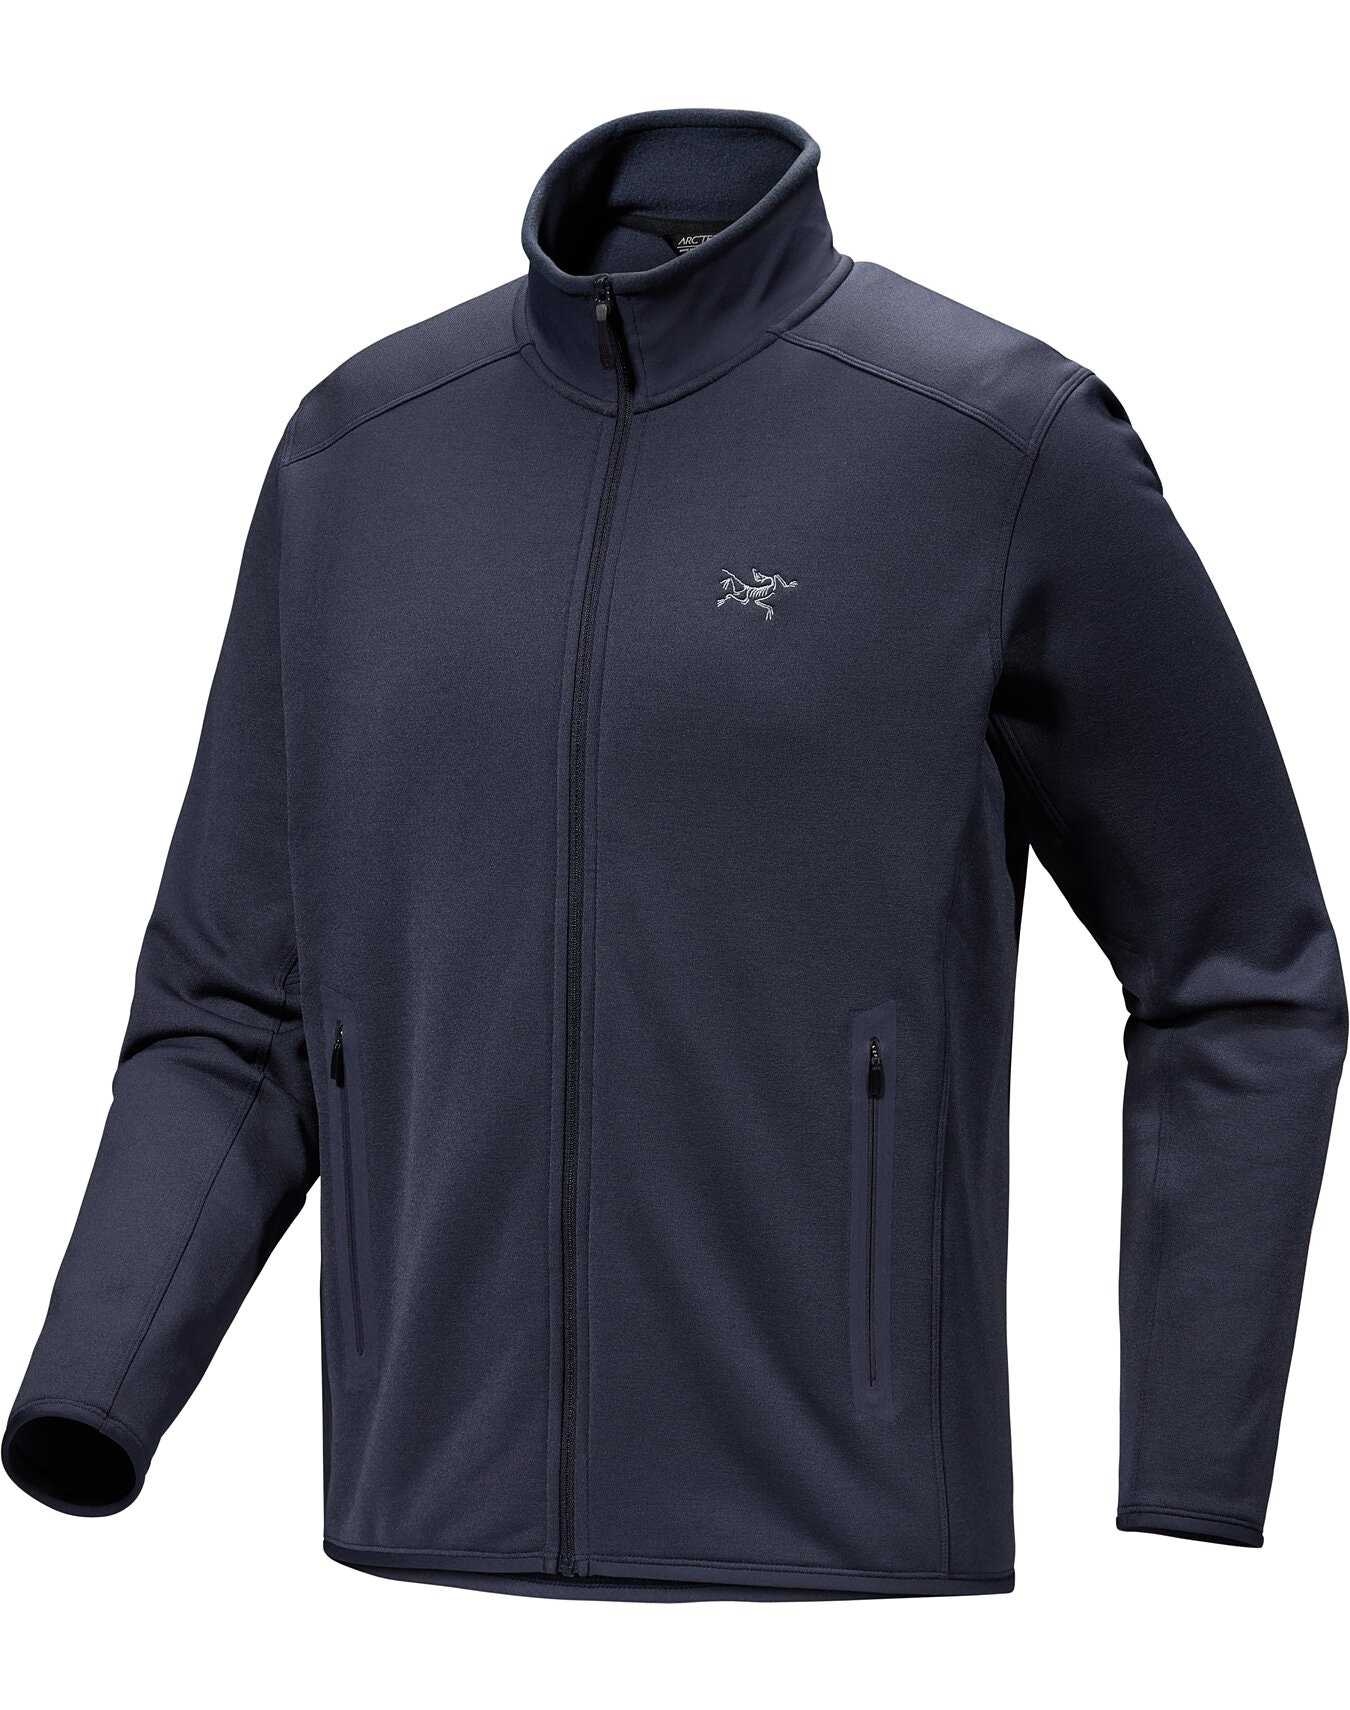 Mn Better Sweater Jacket - Track 'N Trail